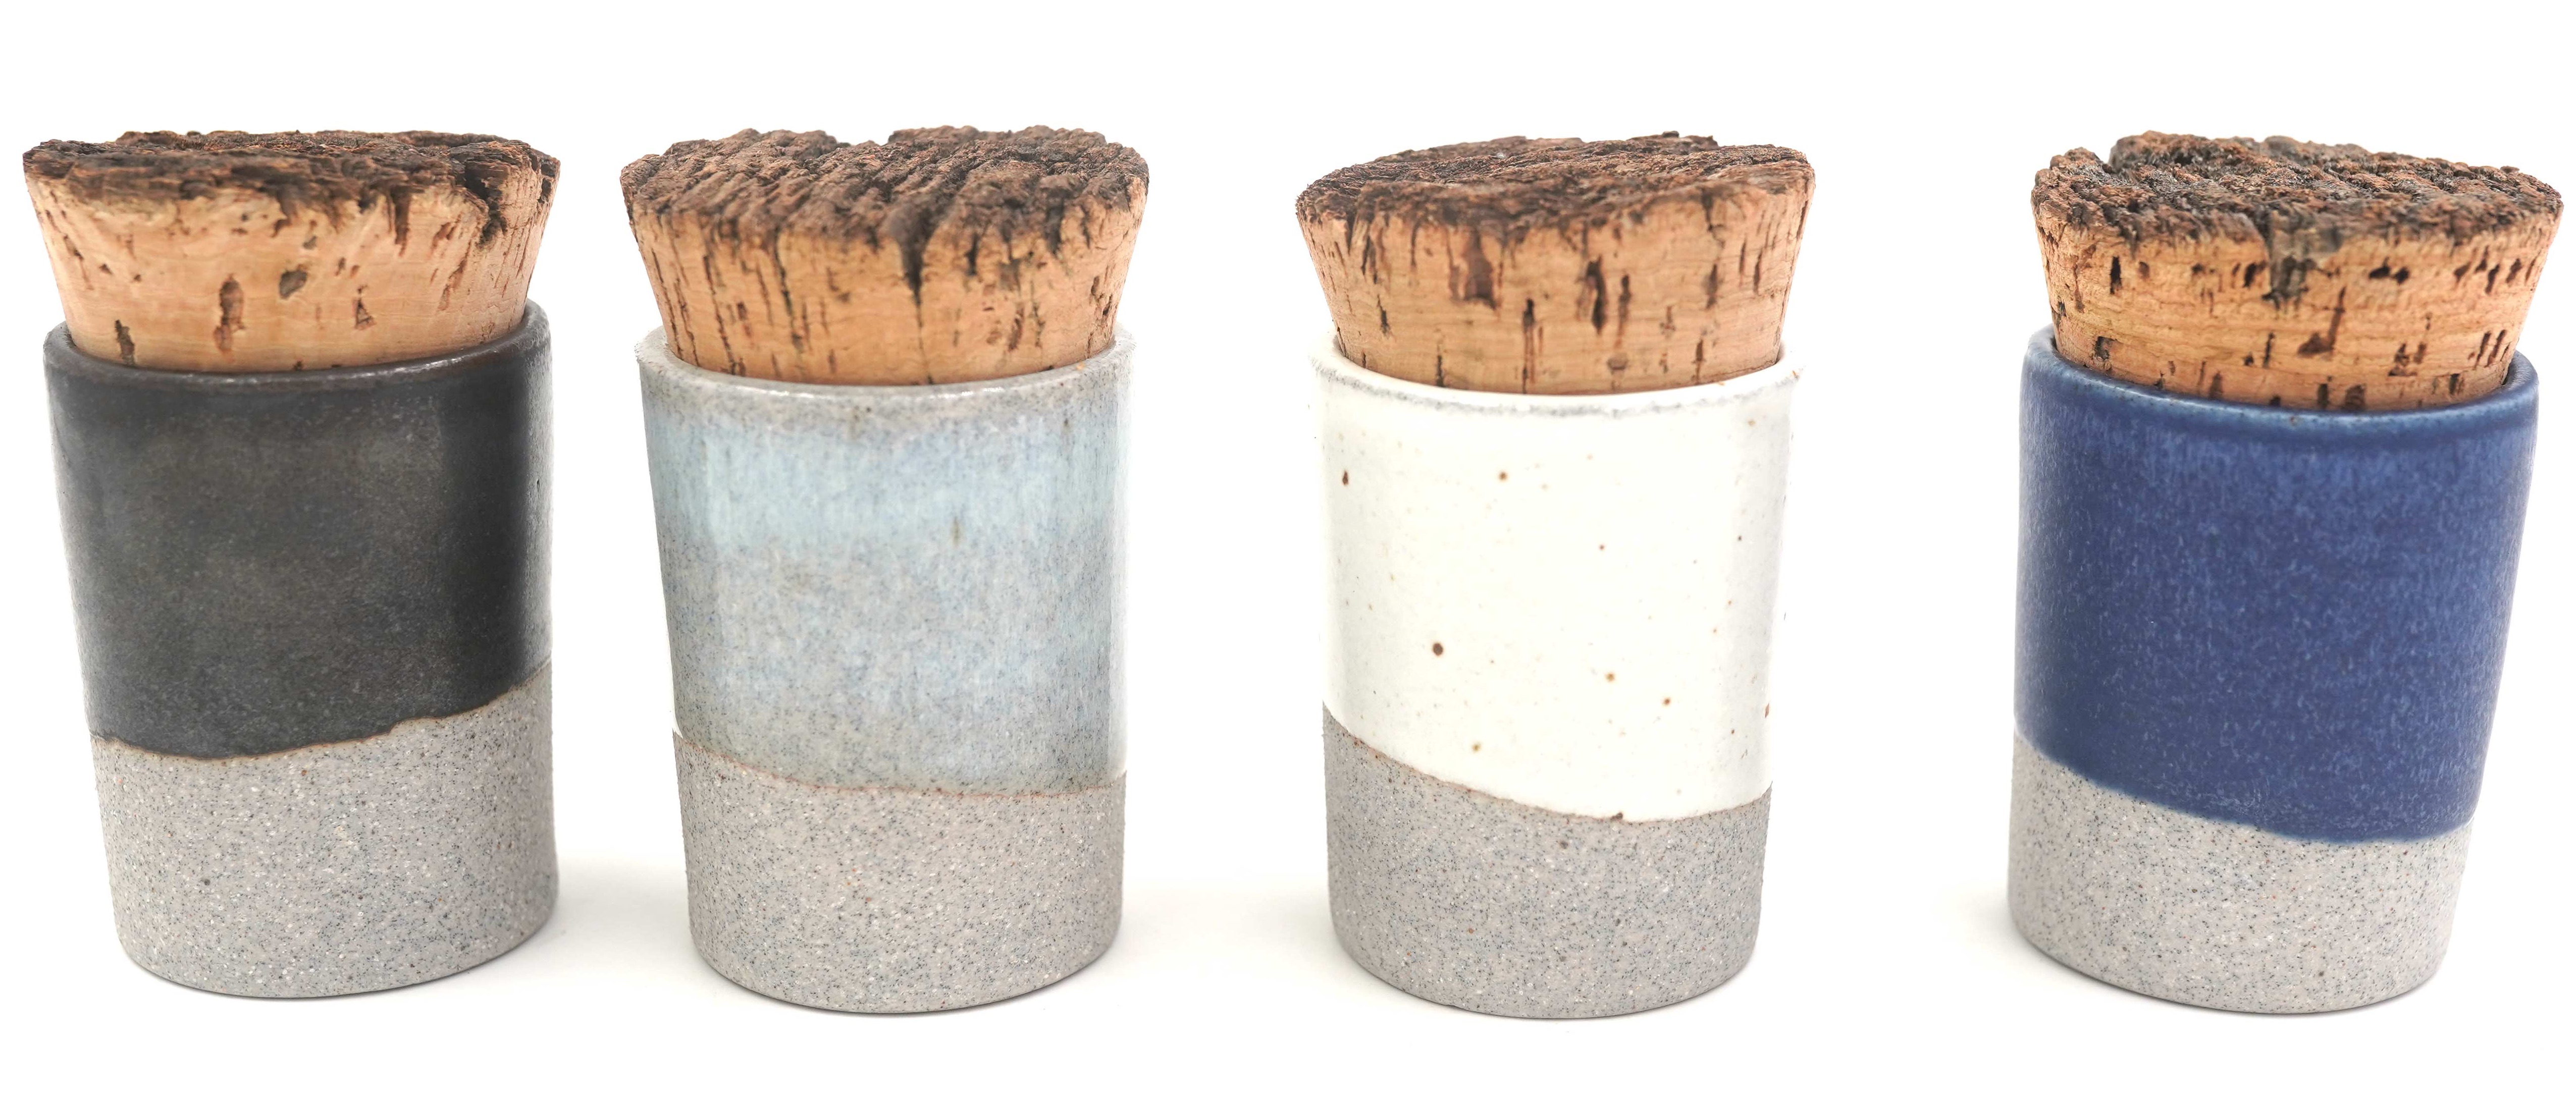 Mini Canister with Bark Top 2 oz.